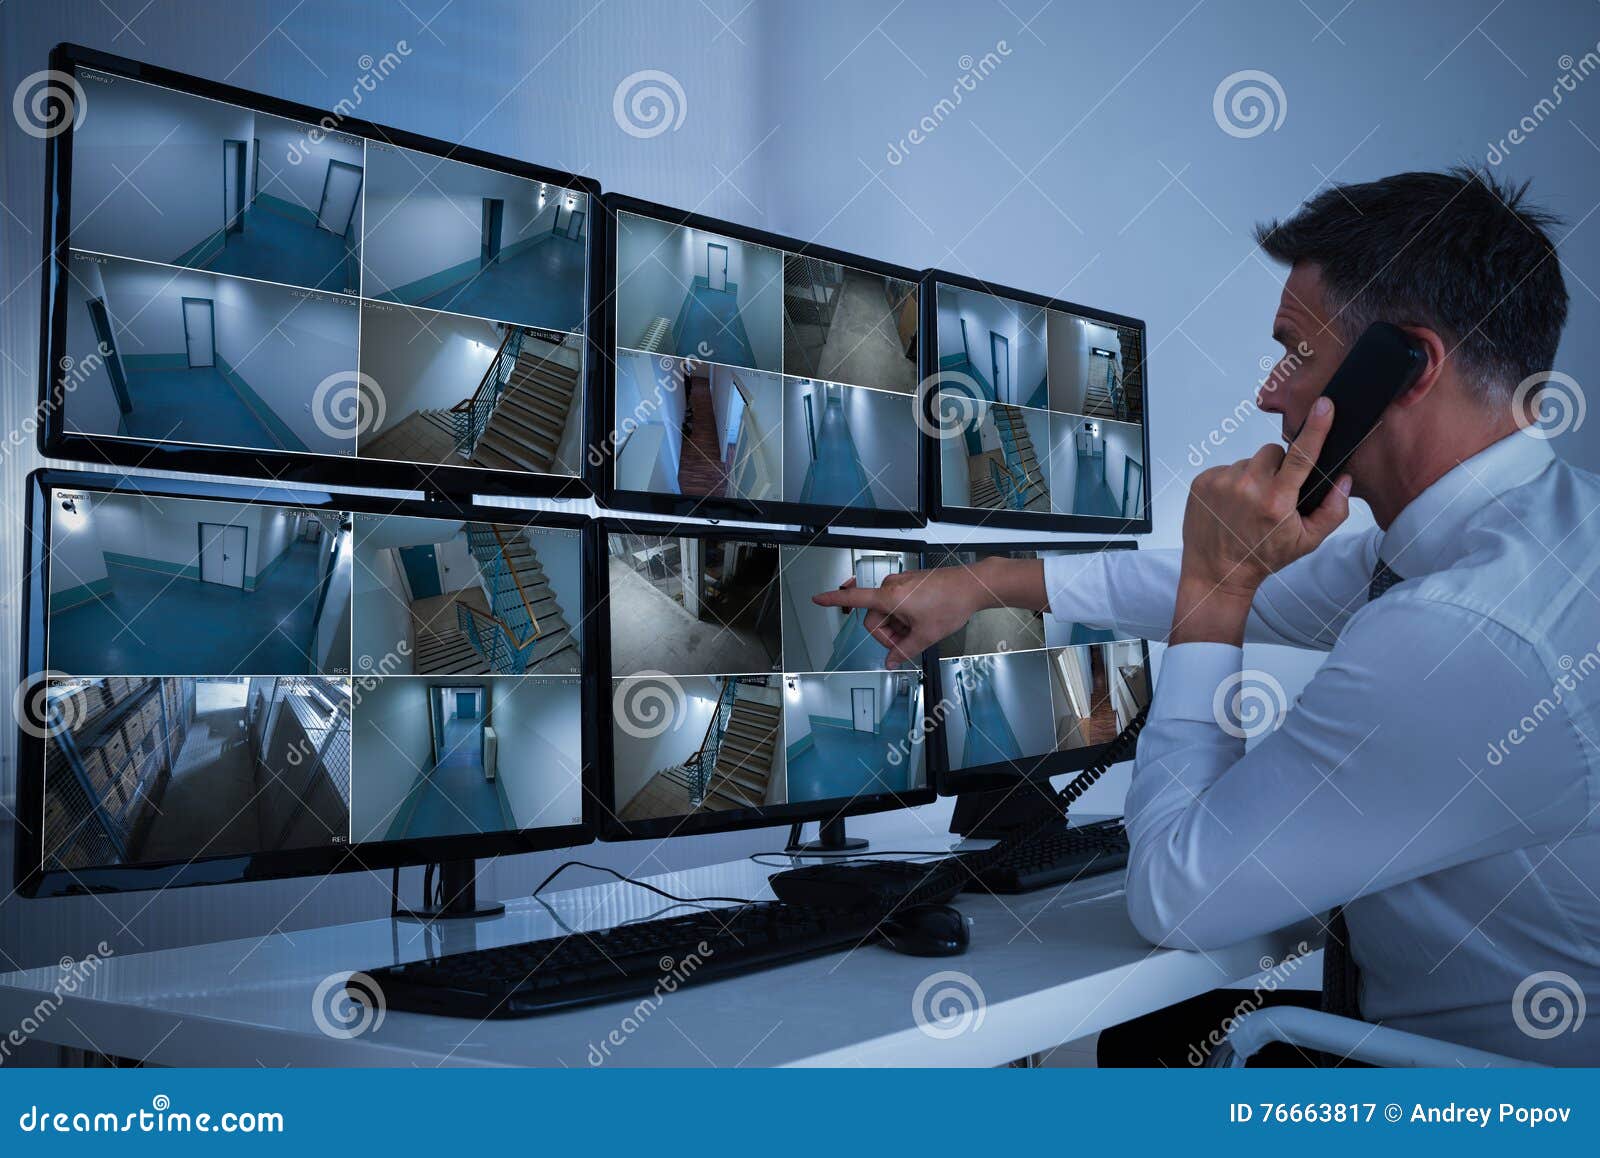 security system operator looking at cctv footage